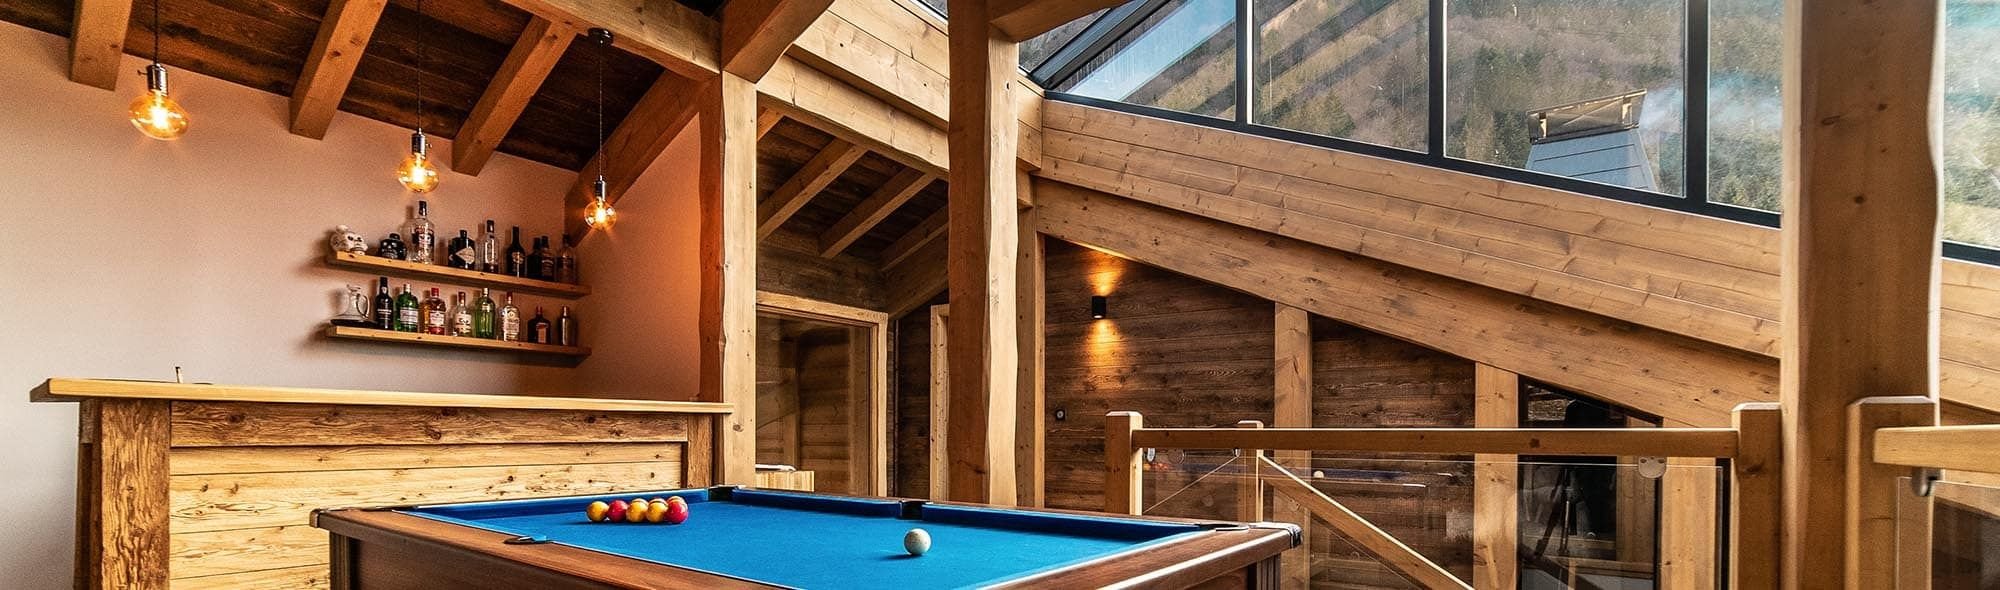 Chalet with hot tub sauna and catering